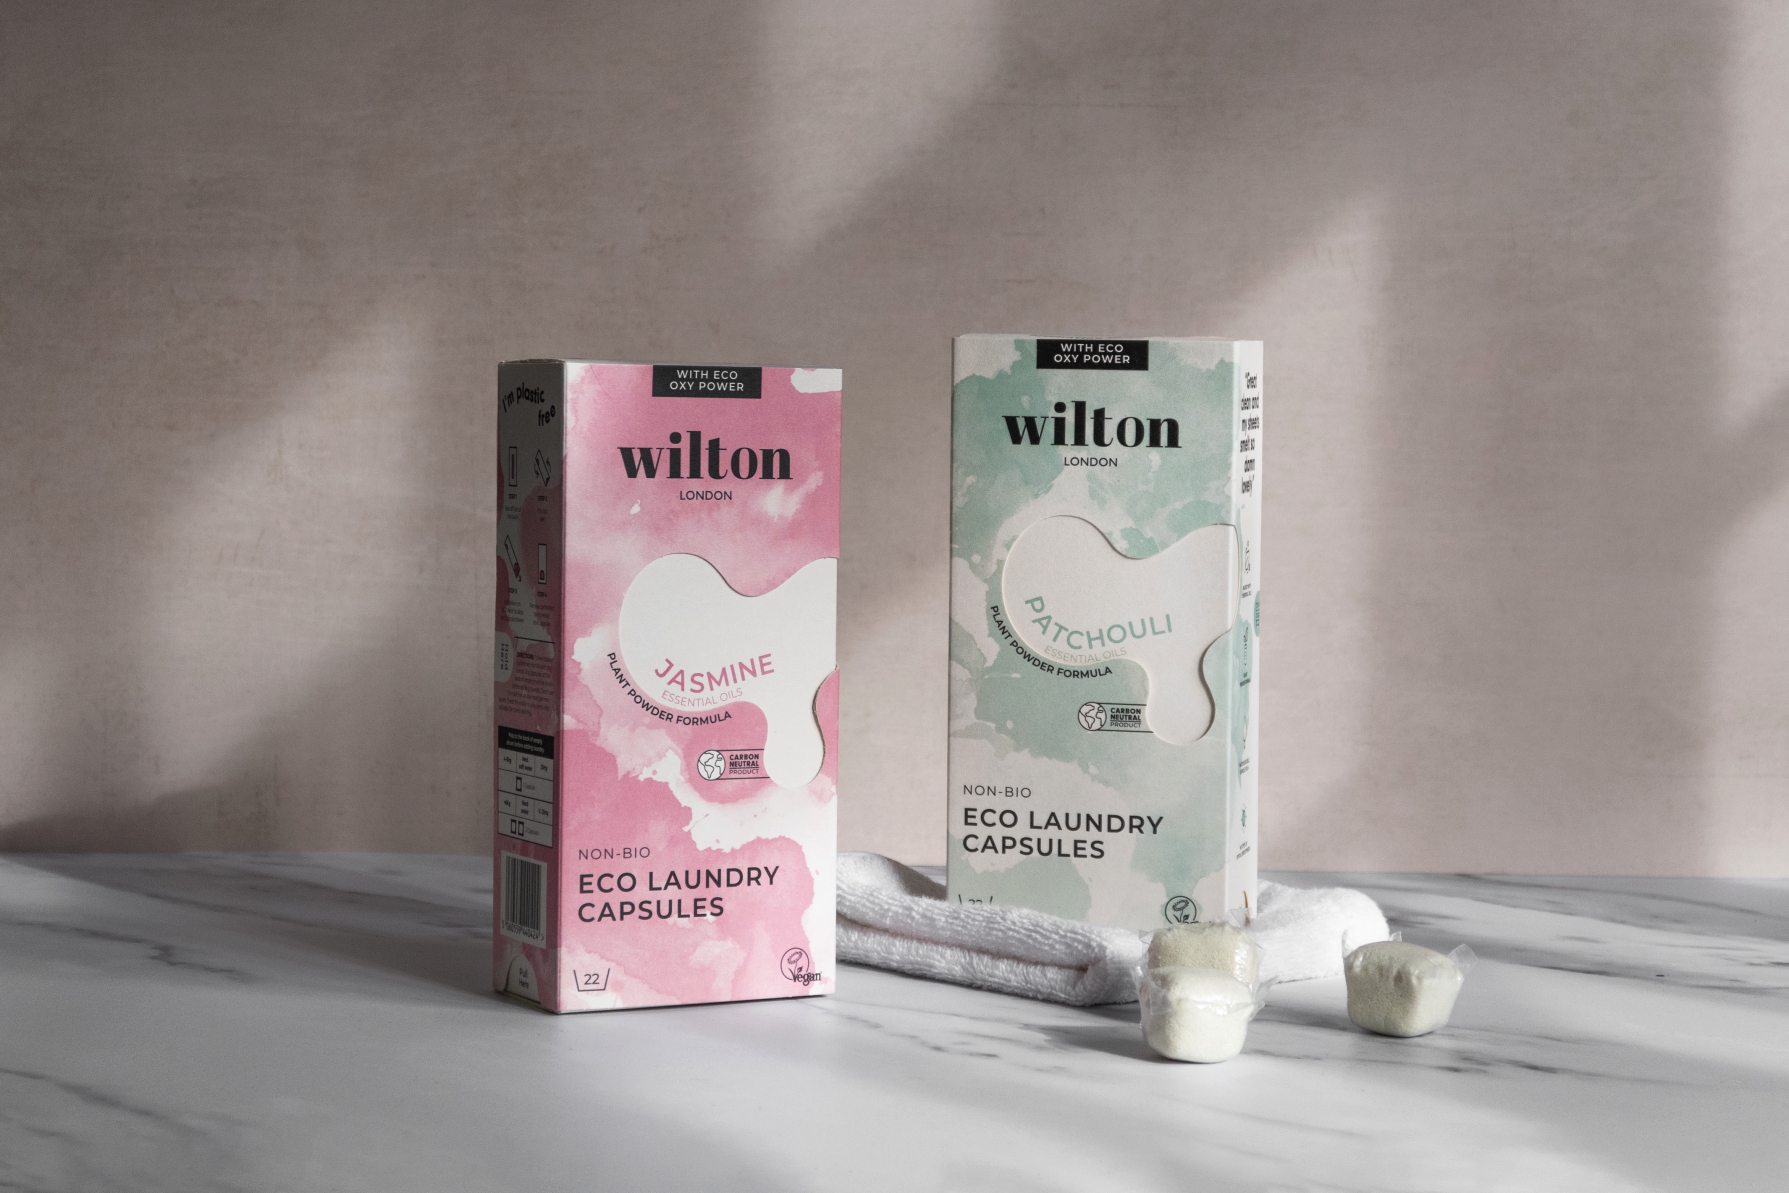 Wilton London debuts New Plant-Powder Eco Laundry Capsule Infused with Essential oils.